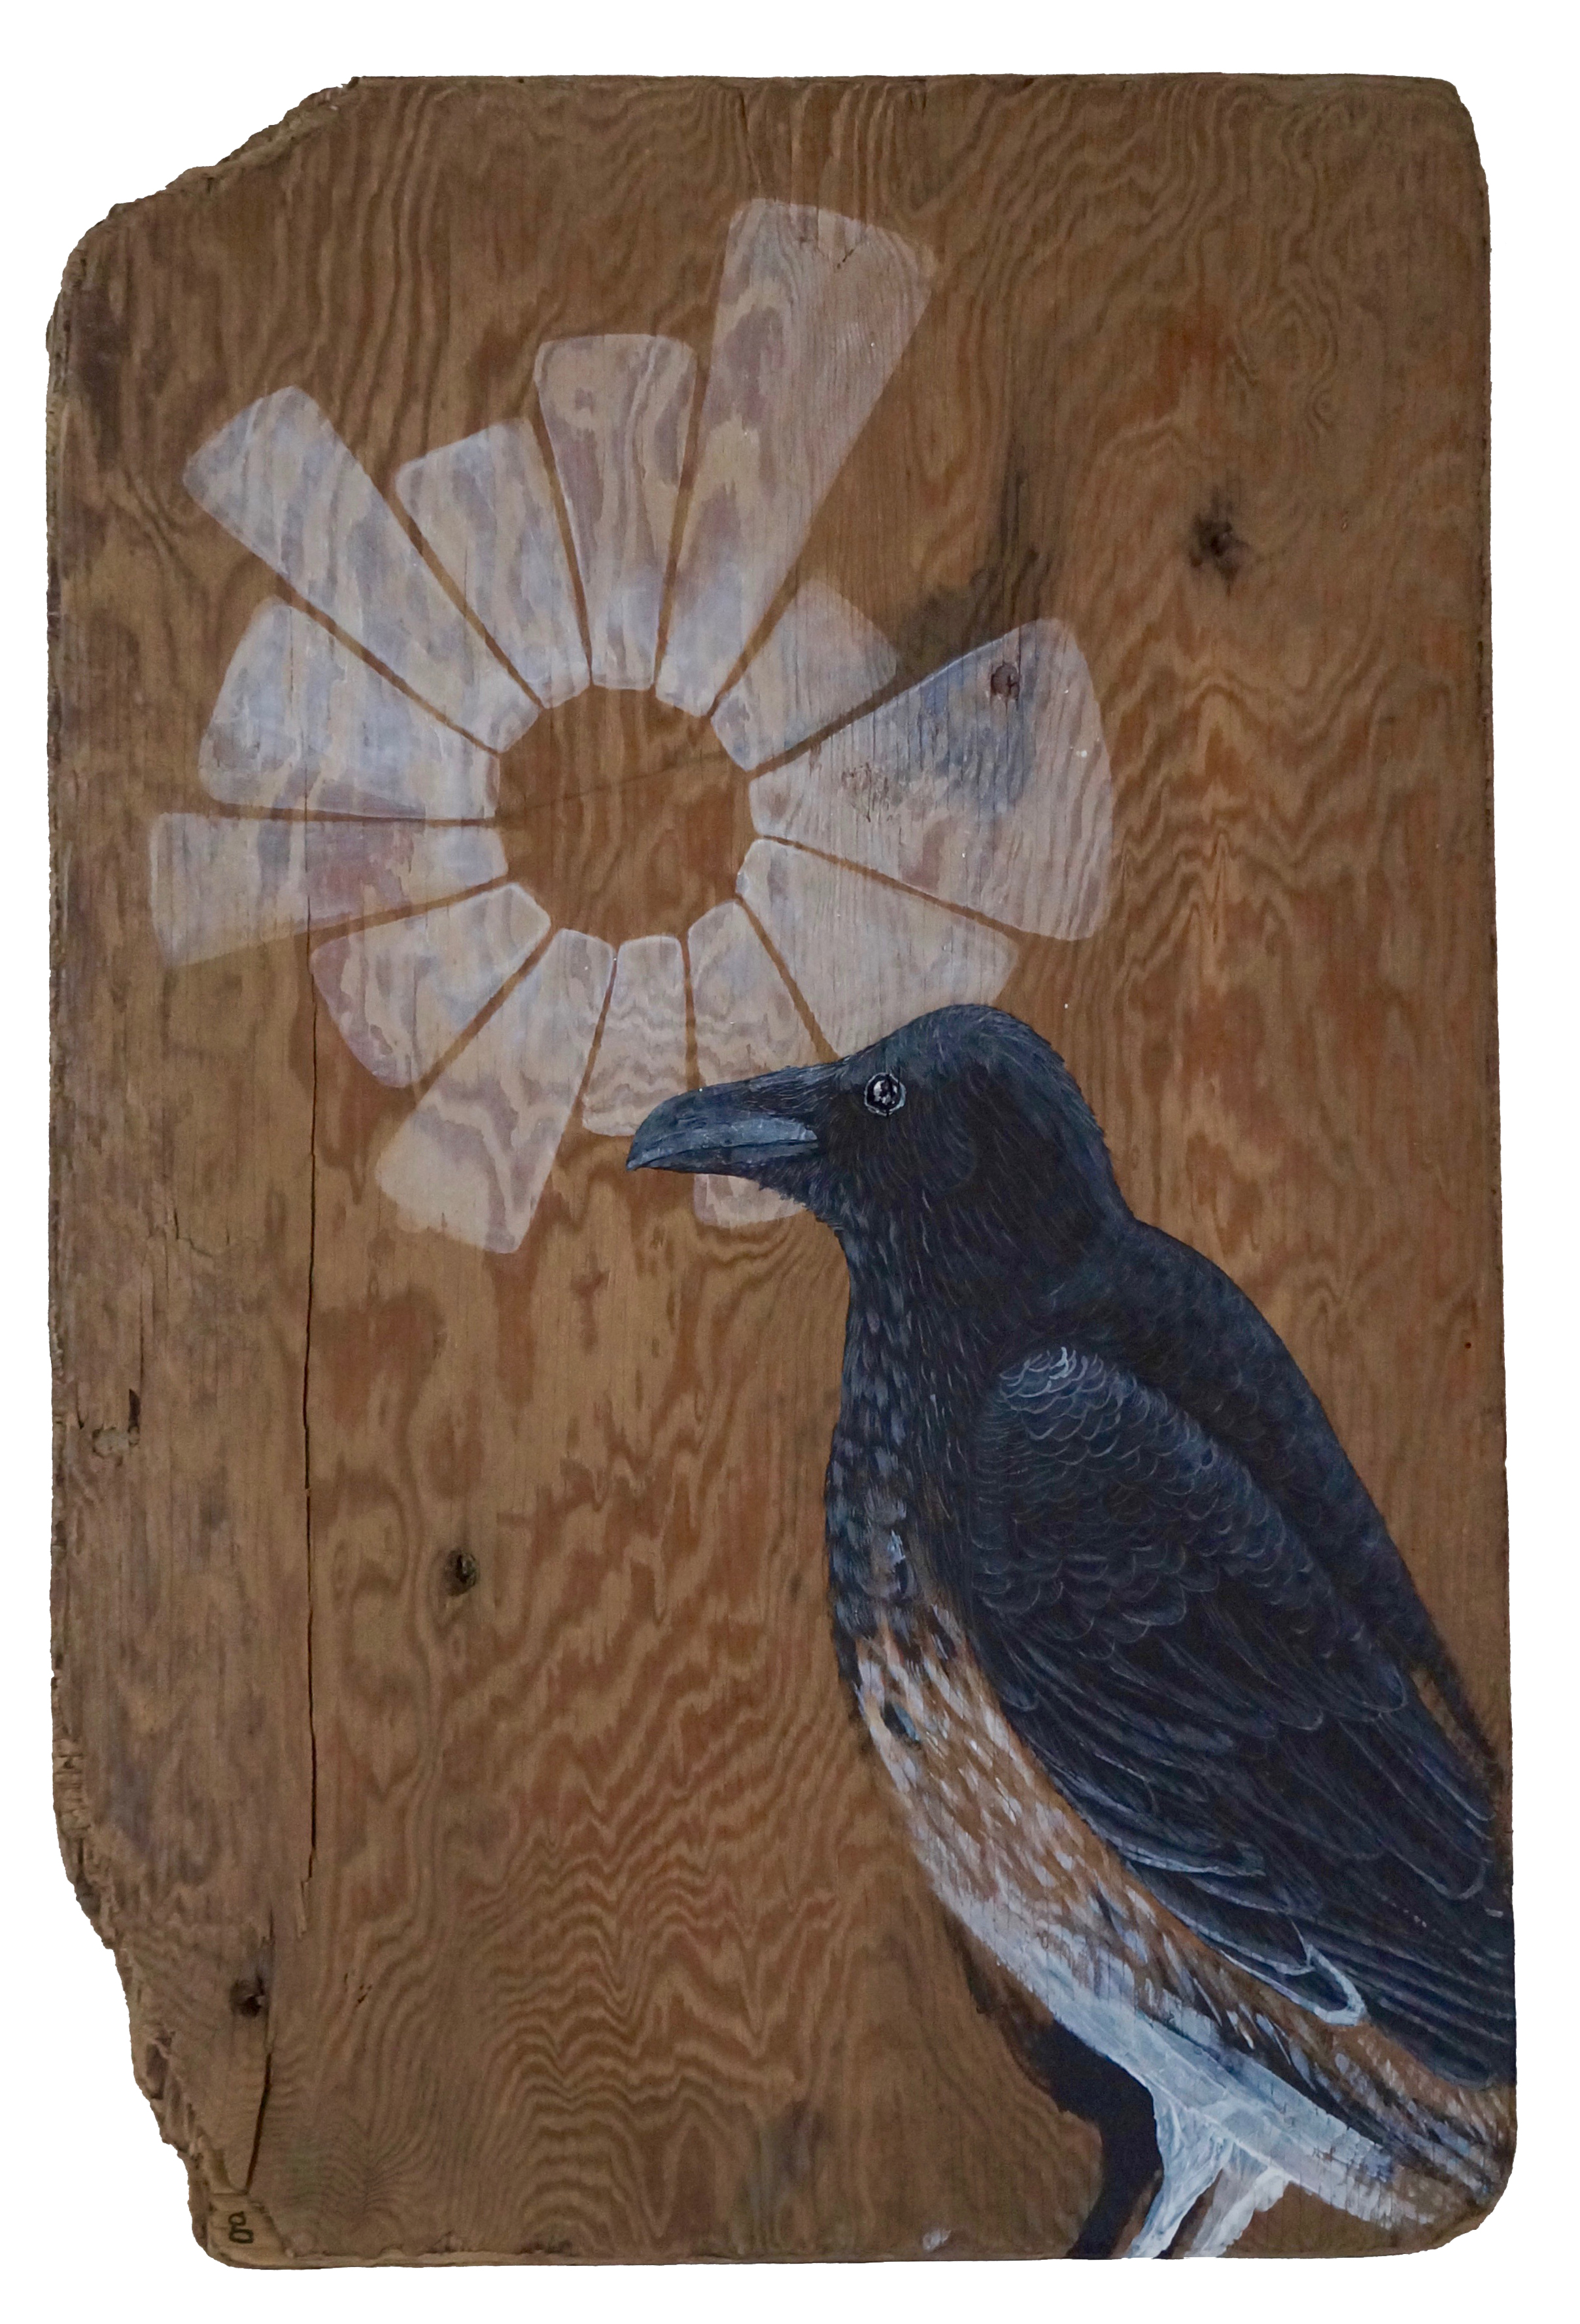  GHOST RAVEN  2017  ACRYLIC ON FOUND WOOD  21" x 14" x 1/2"  SOLD 